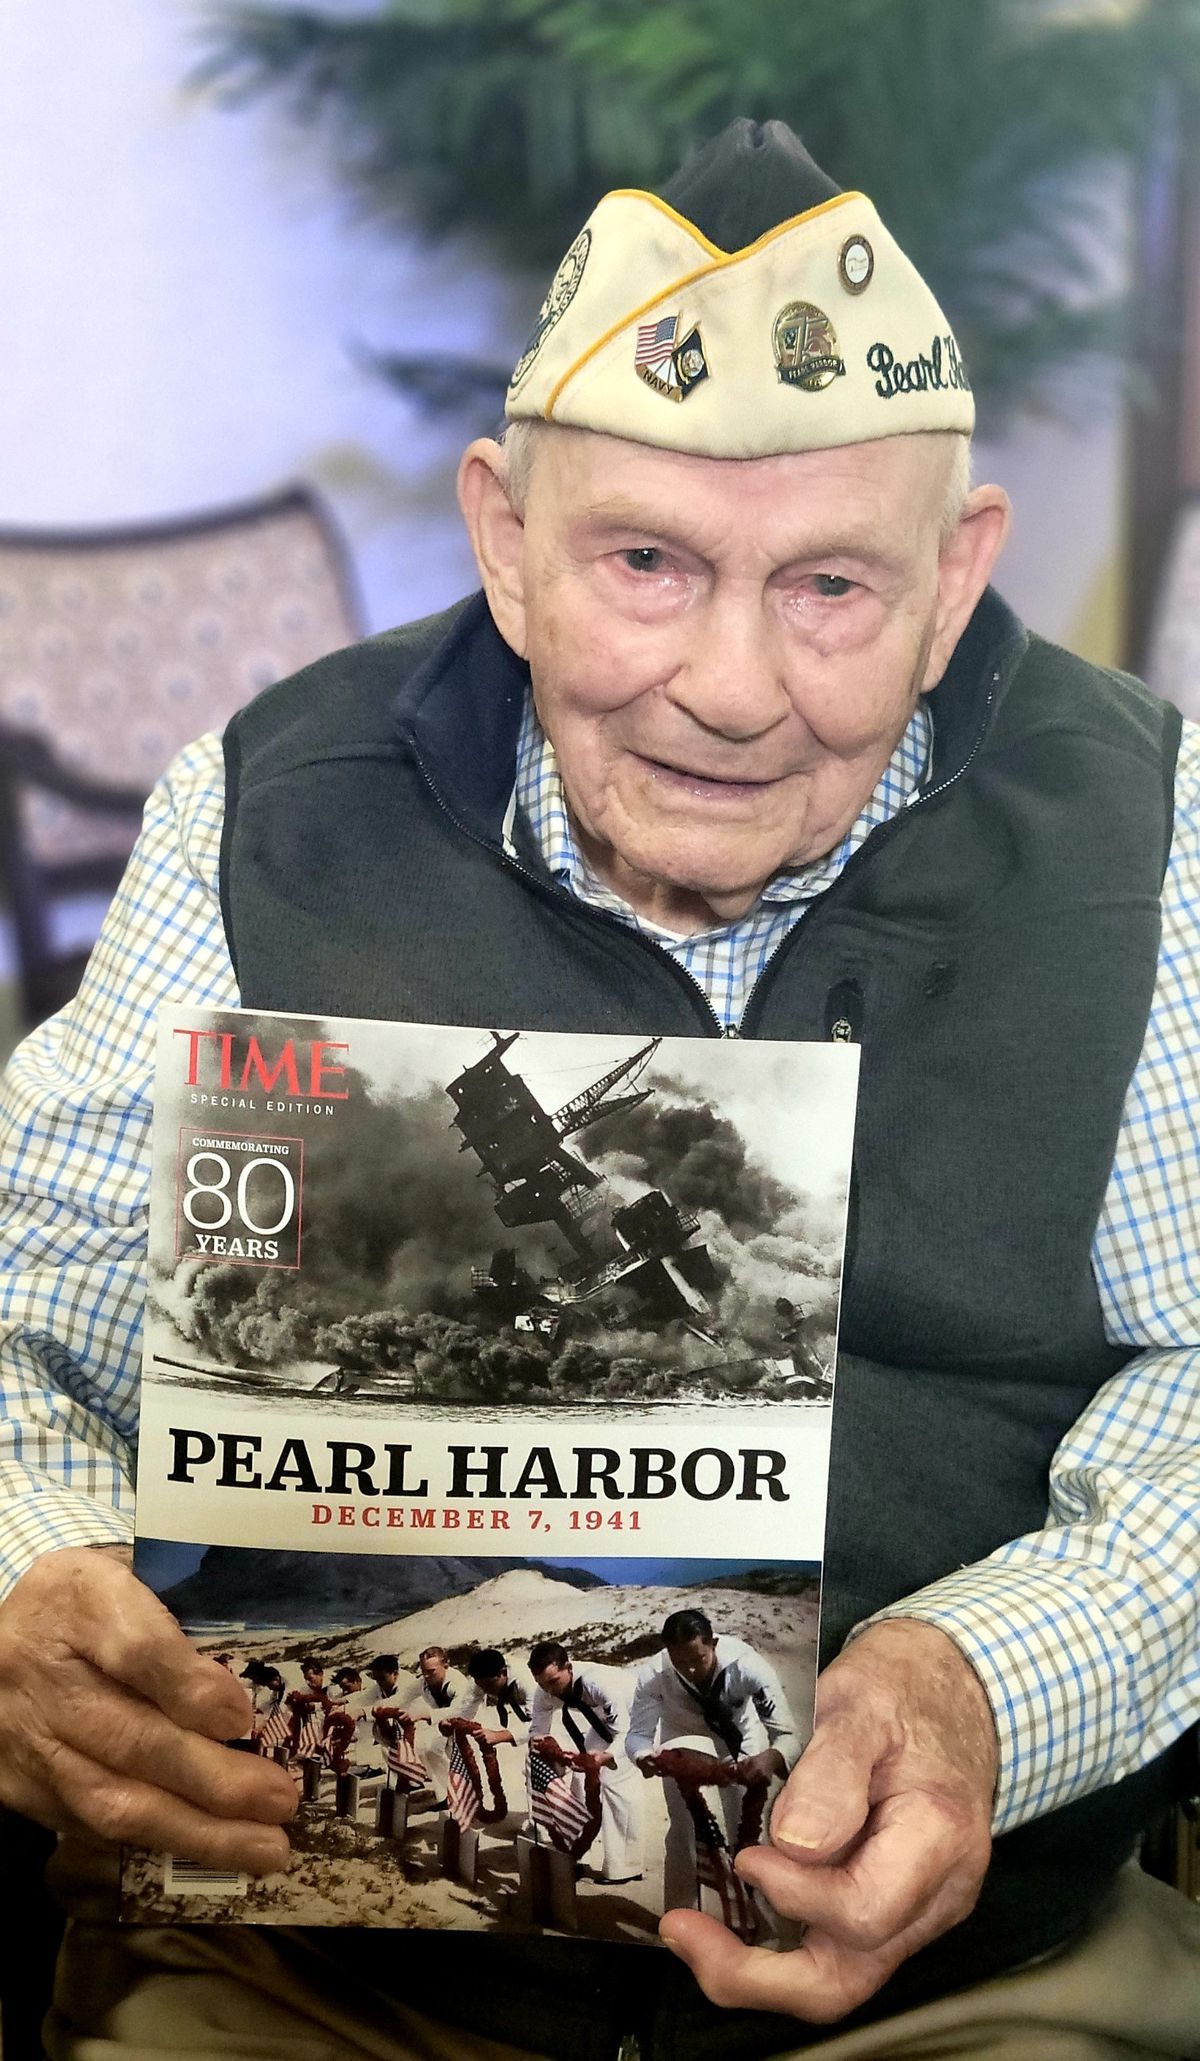 James Dewitt, 100, was serving in the Navy and saw the attack on Pearl Harbor in 1941. He spoke to Honor Flight Chicago from an assisted living facility in South Bend, Ind. 